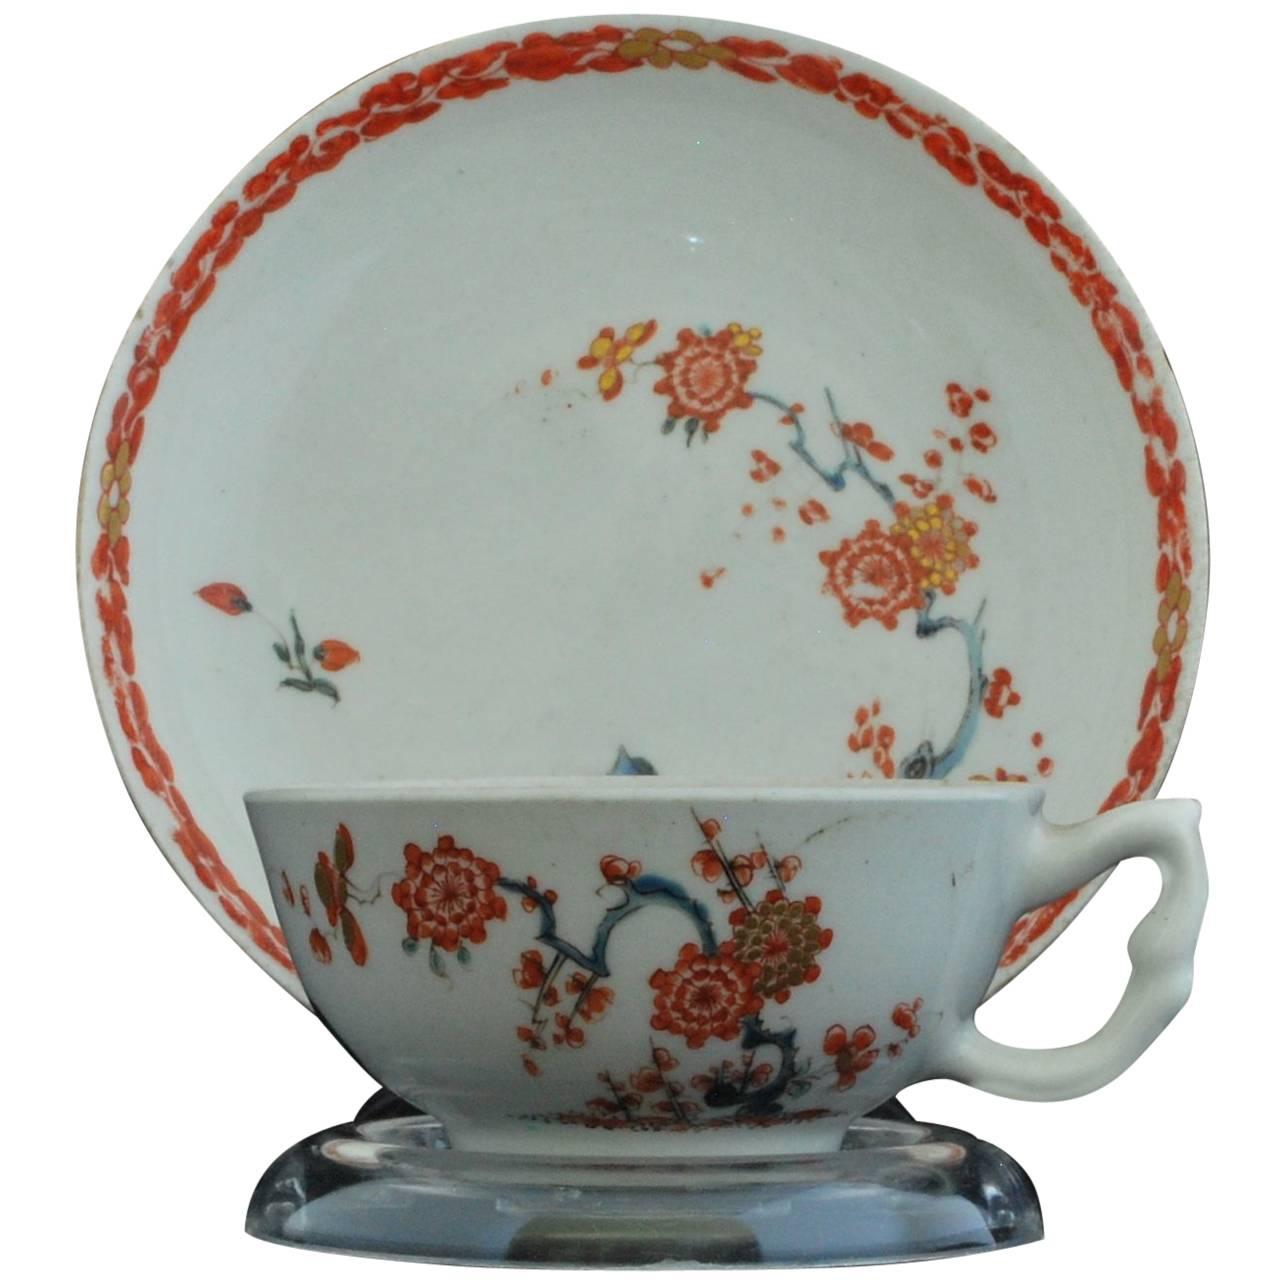 What is Japanese pottery called?